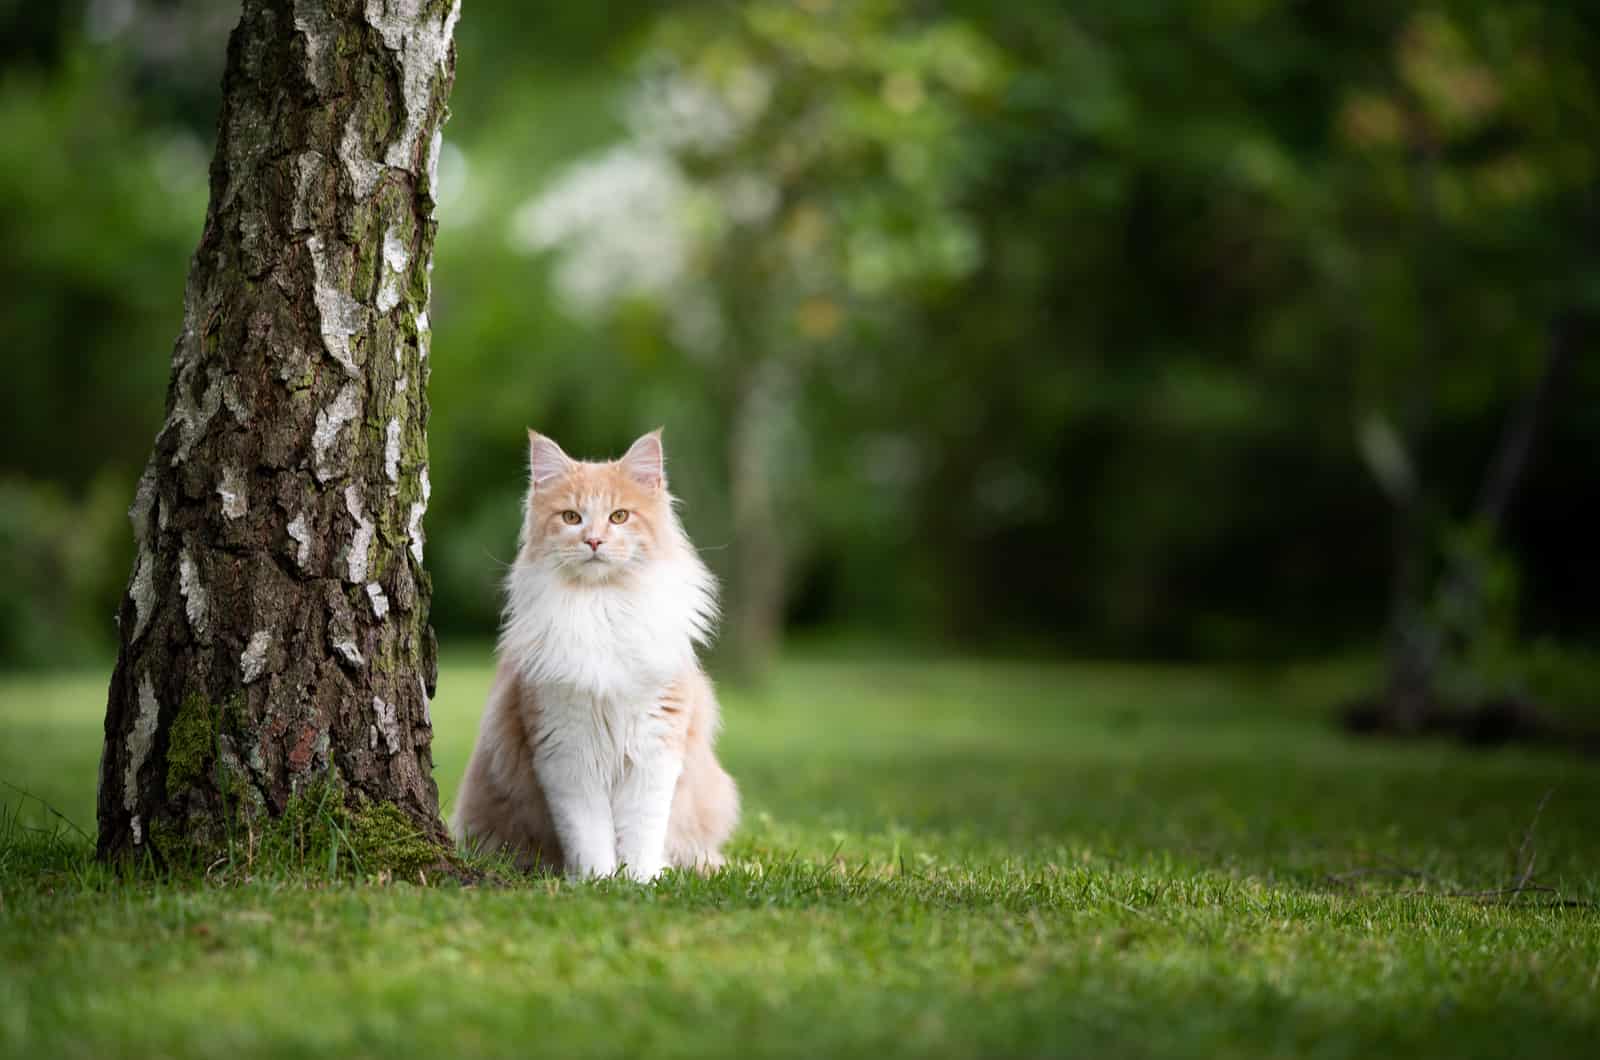 a beautiful cat is sitting on the grass